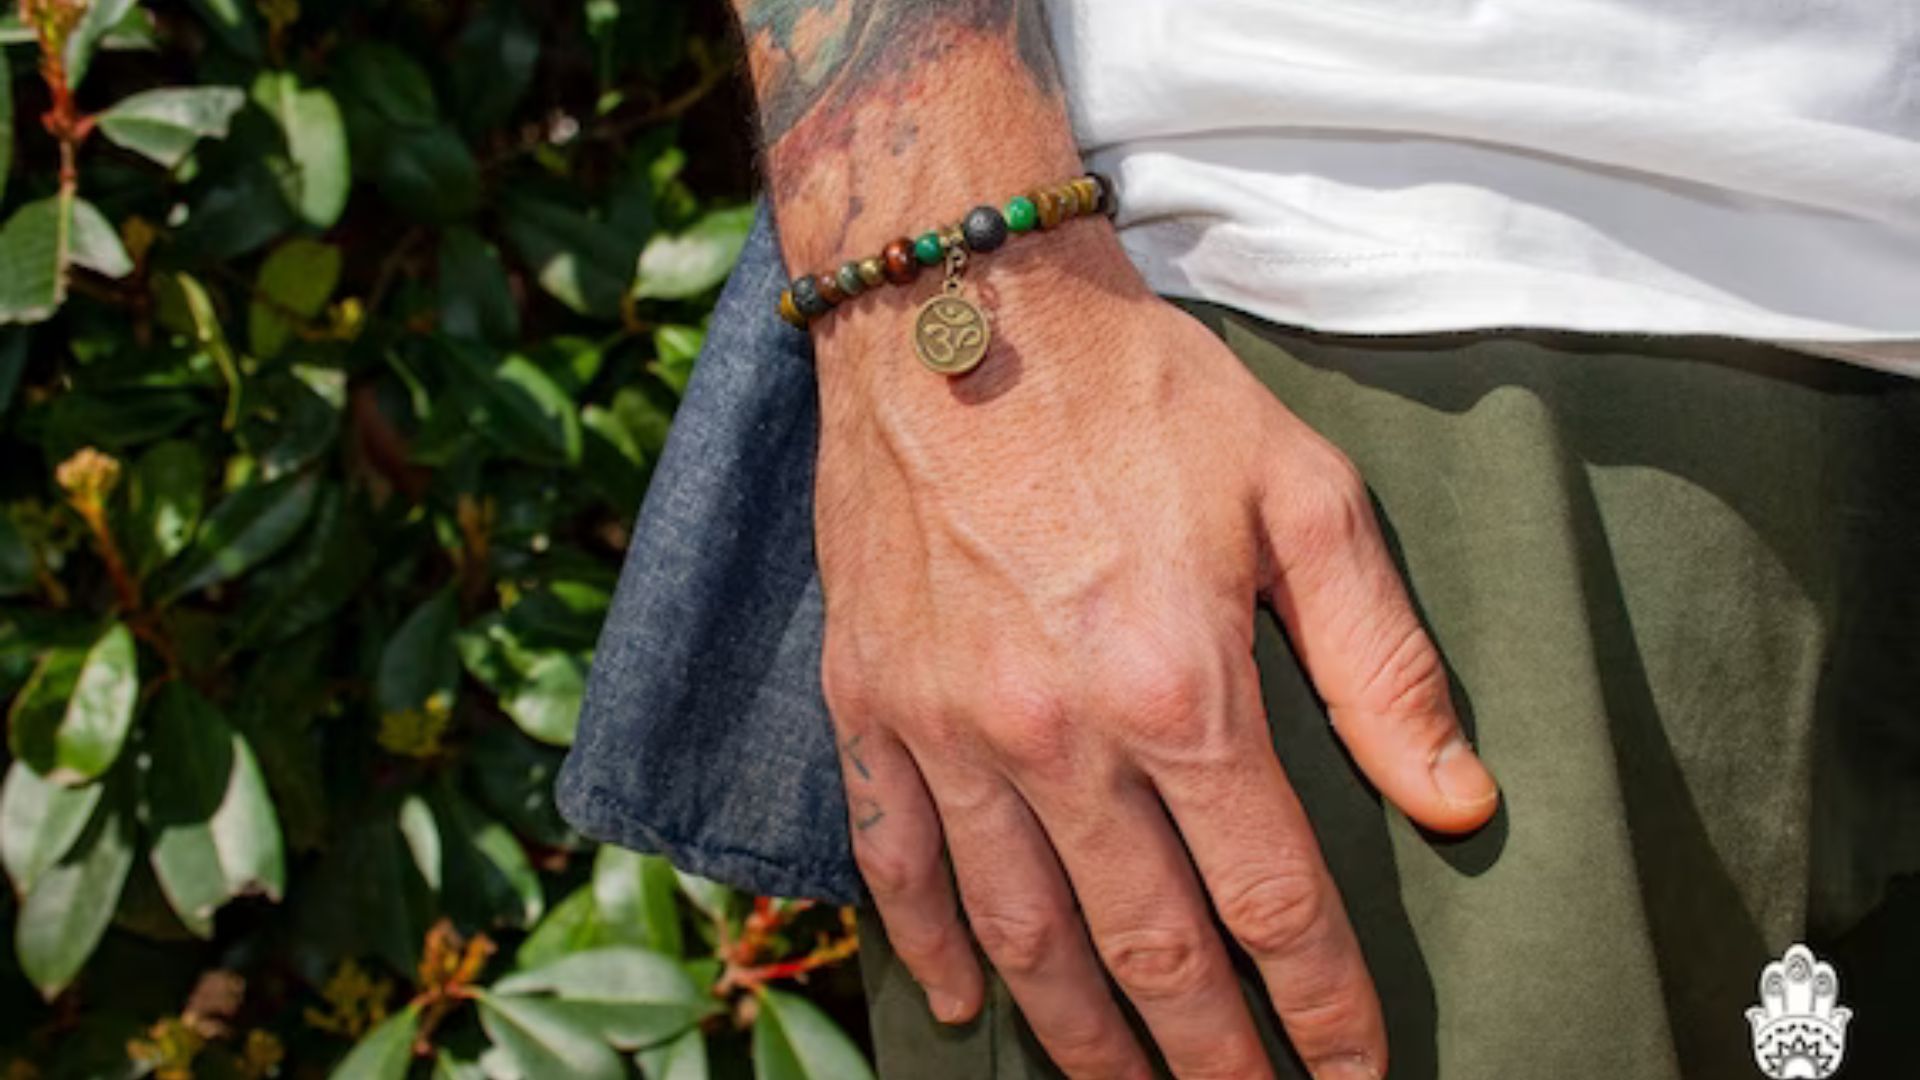 Different Color Beads Bracelet On Man's Hand